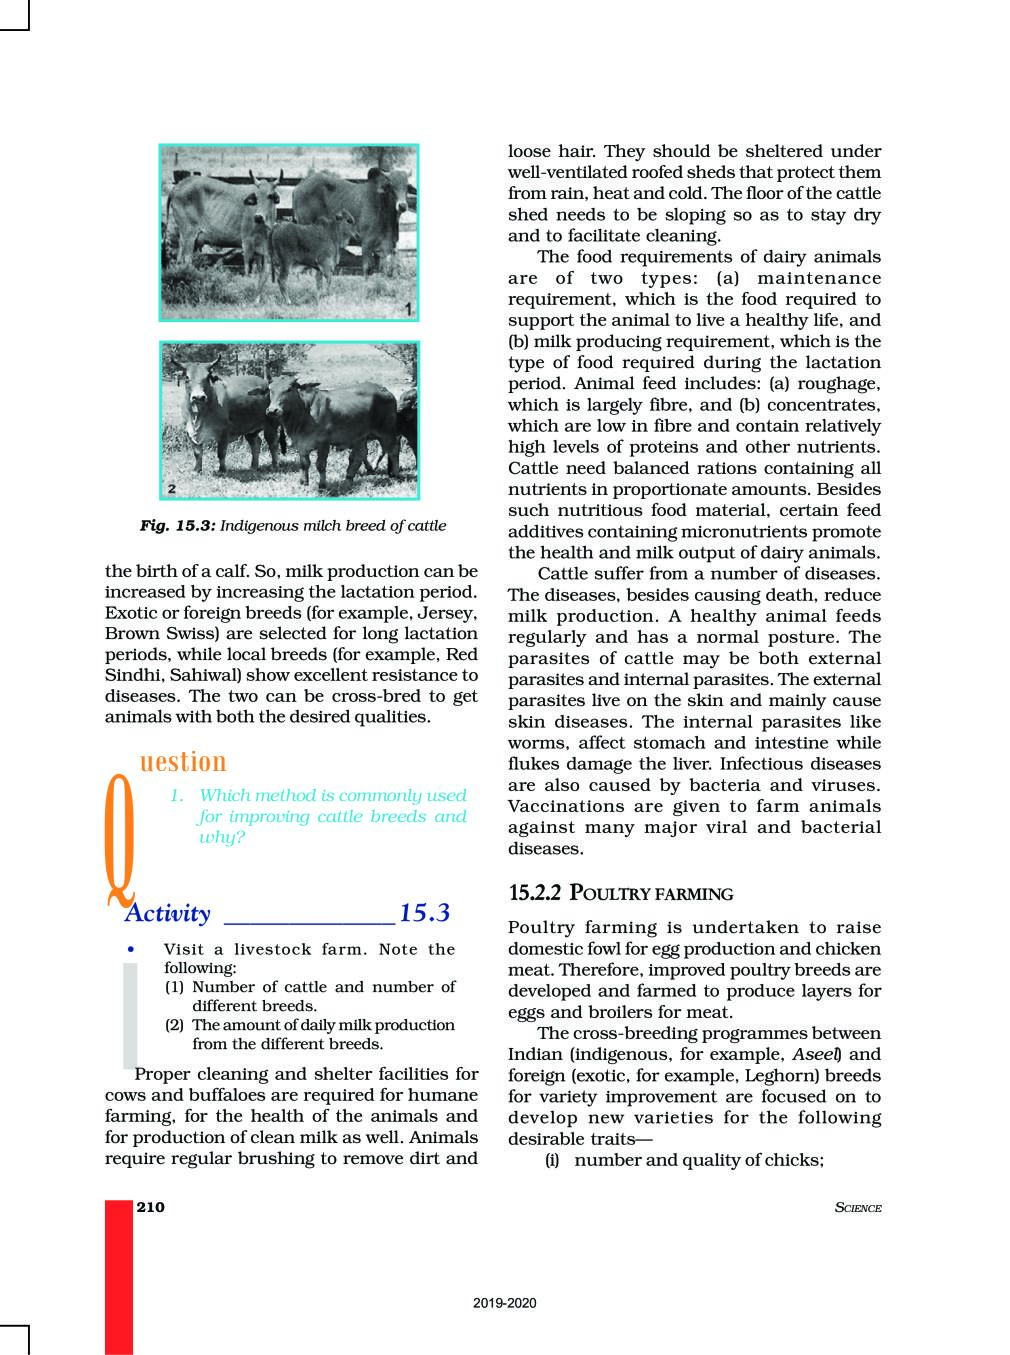 NCERT Book Class 9 Science Chapter 15 Improvement In Food Resources